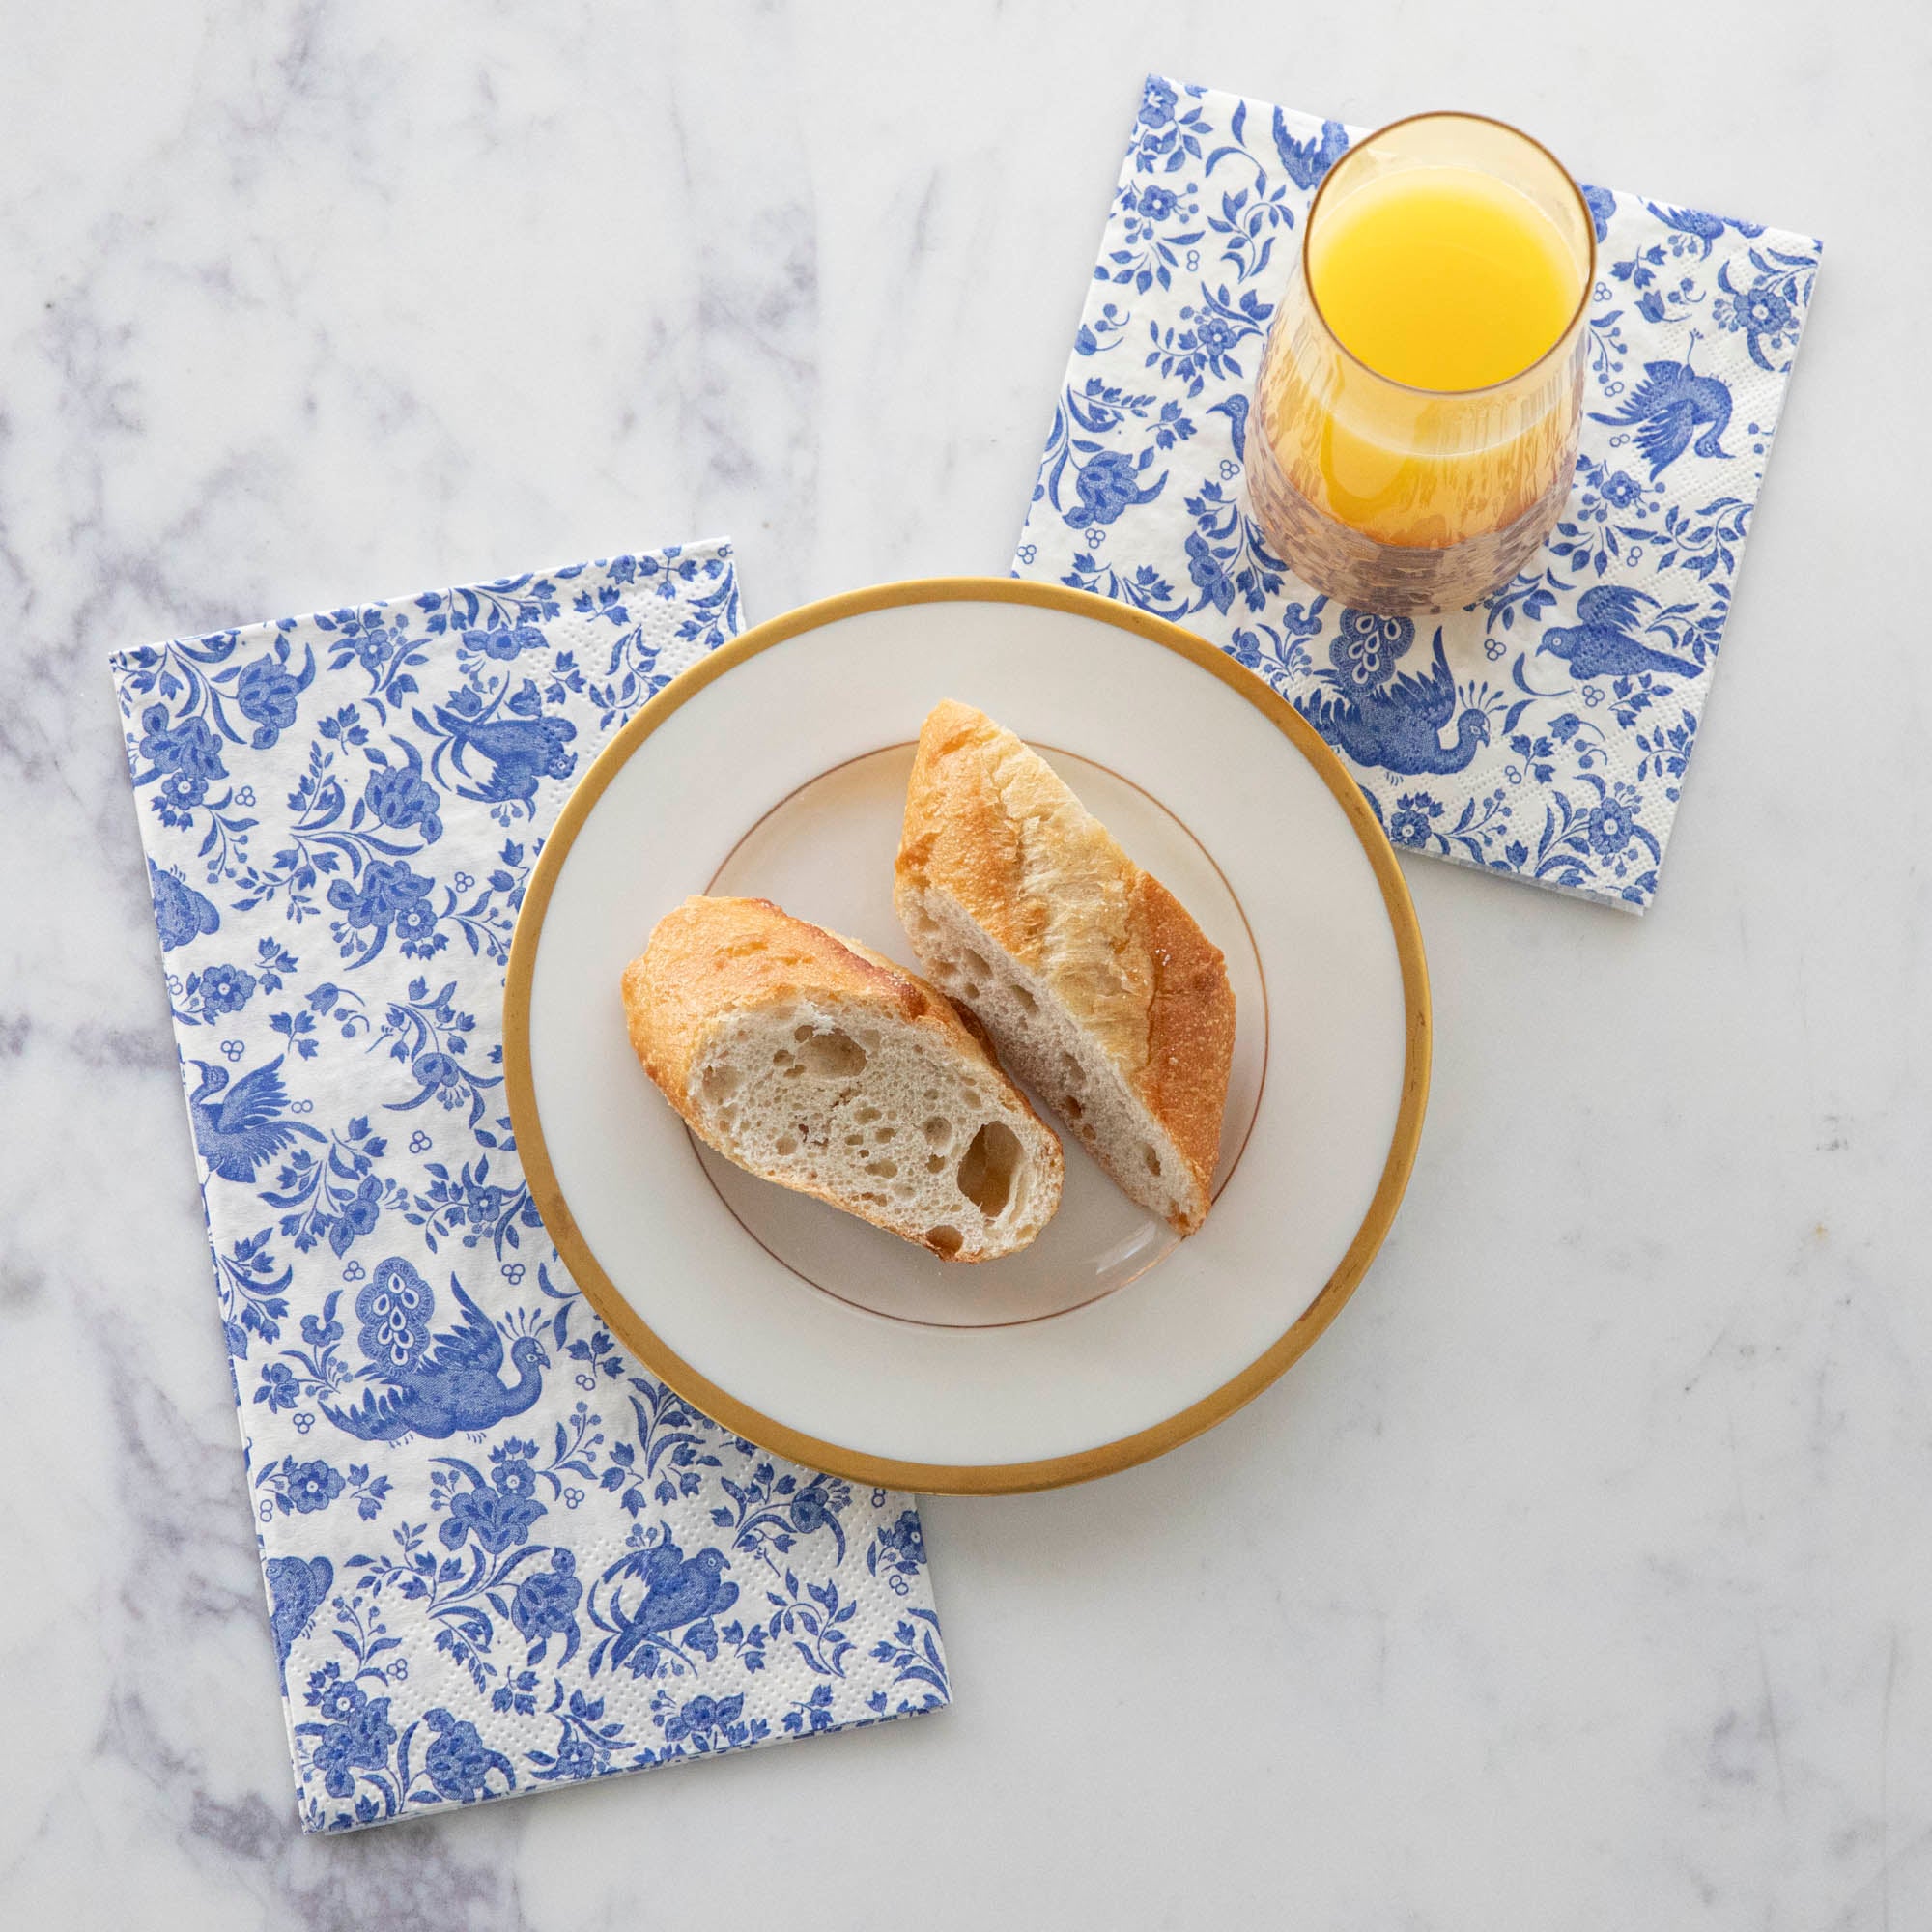 A plate of bread and a glass of juice with Blue Regal Peacock Napkins by Hester &amp; Cook.